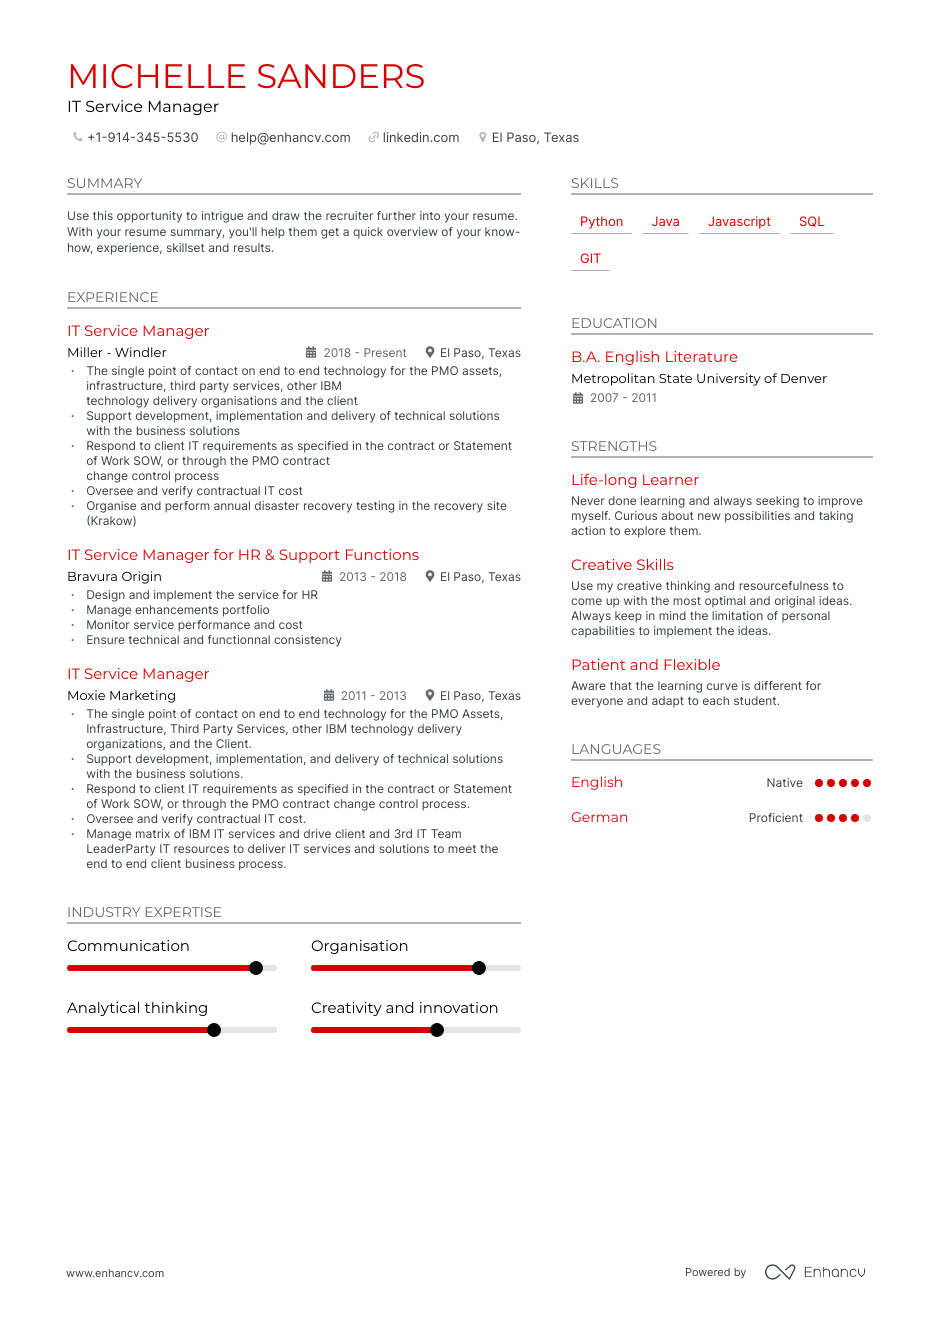 IT Service Manager resume example